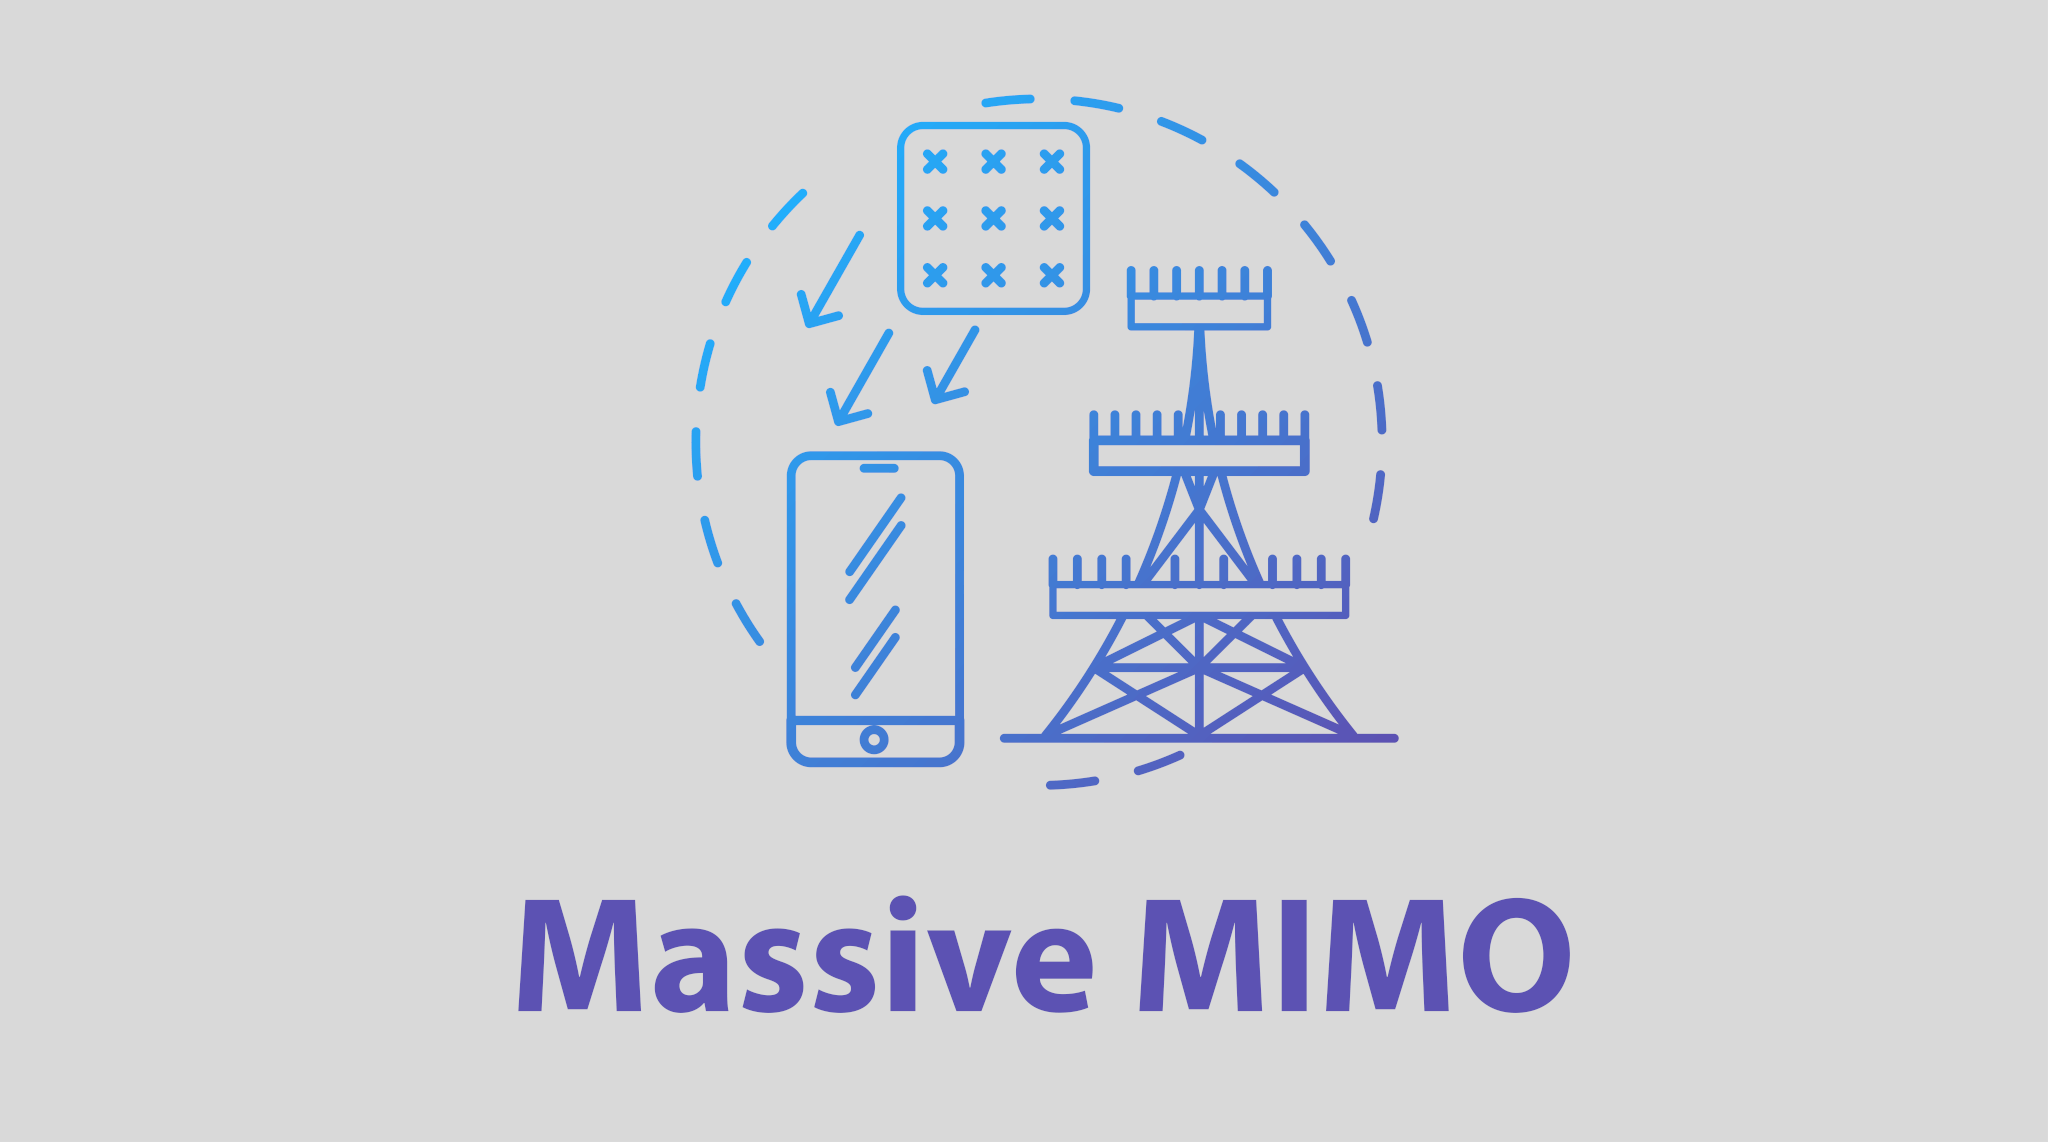 TDD & Massive MIMO for 5G